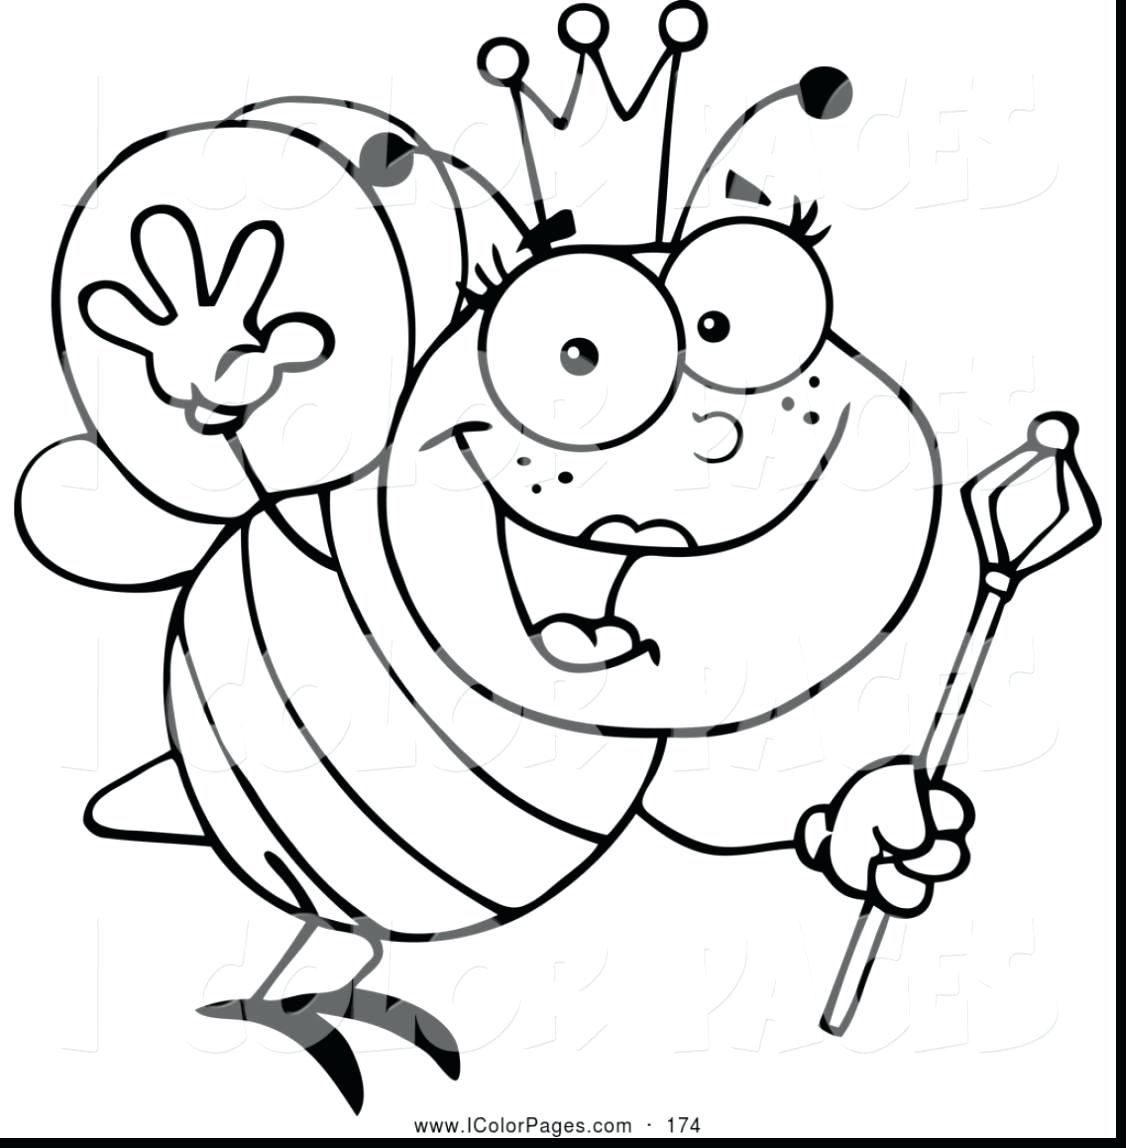 Queen Bee Coloring Page at GetColorings.com | Free printable colorings